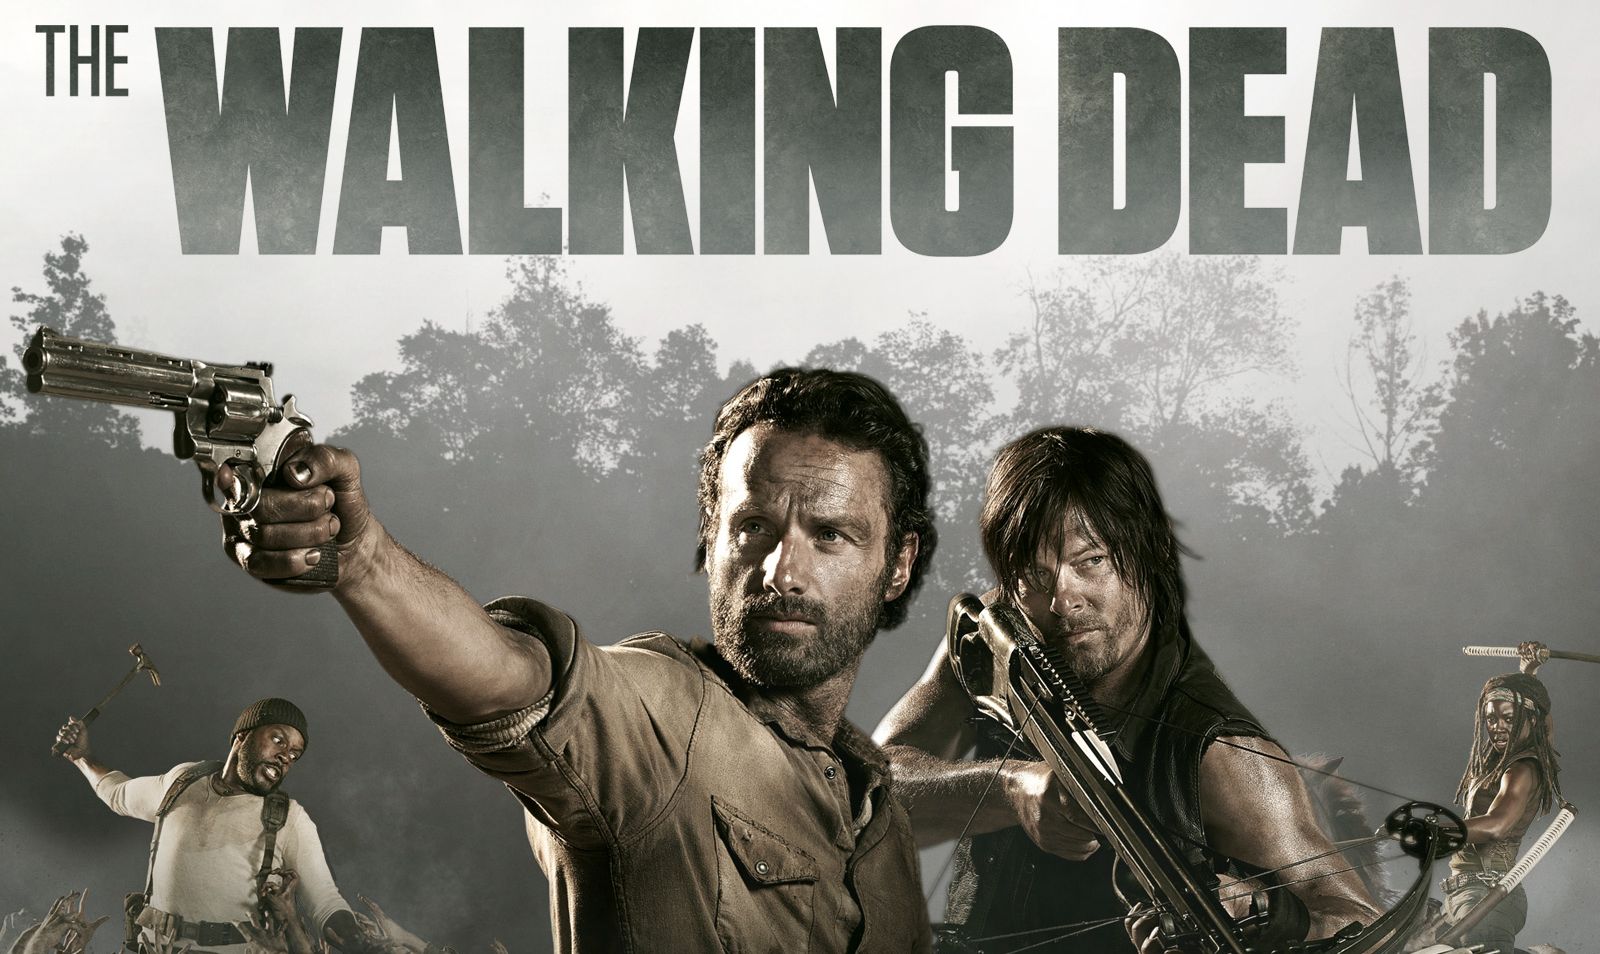 The Walking Dead Sets Finale Record with 15.7M Viewers